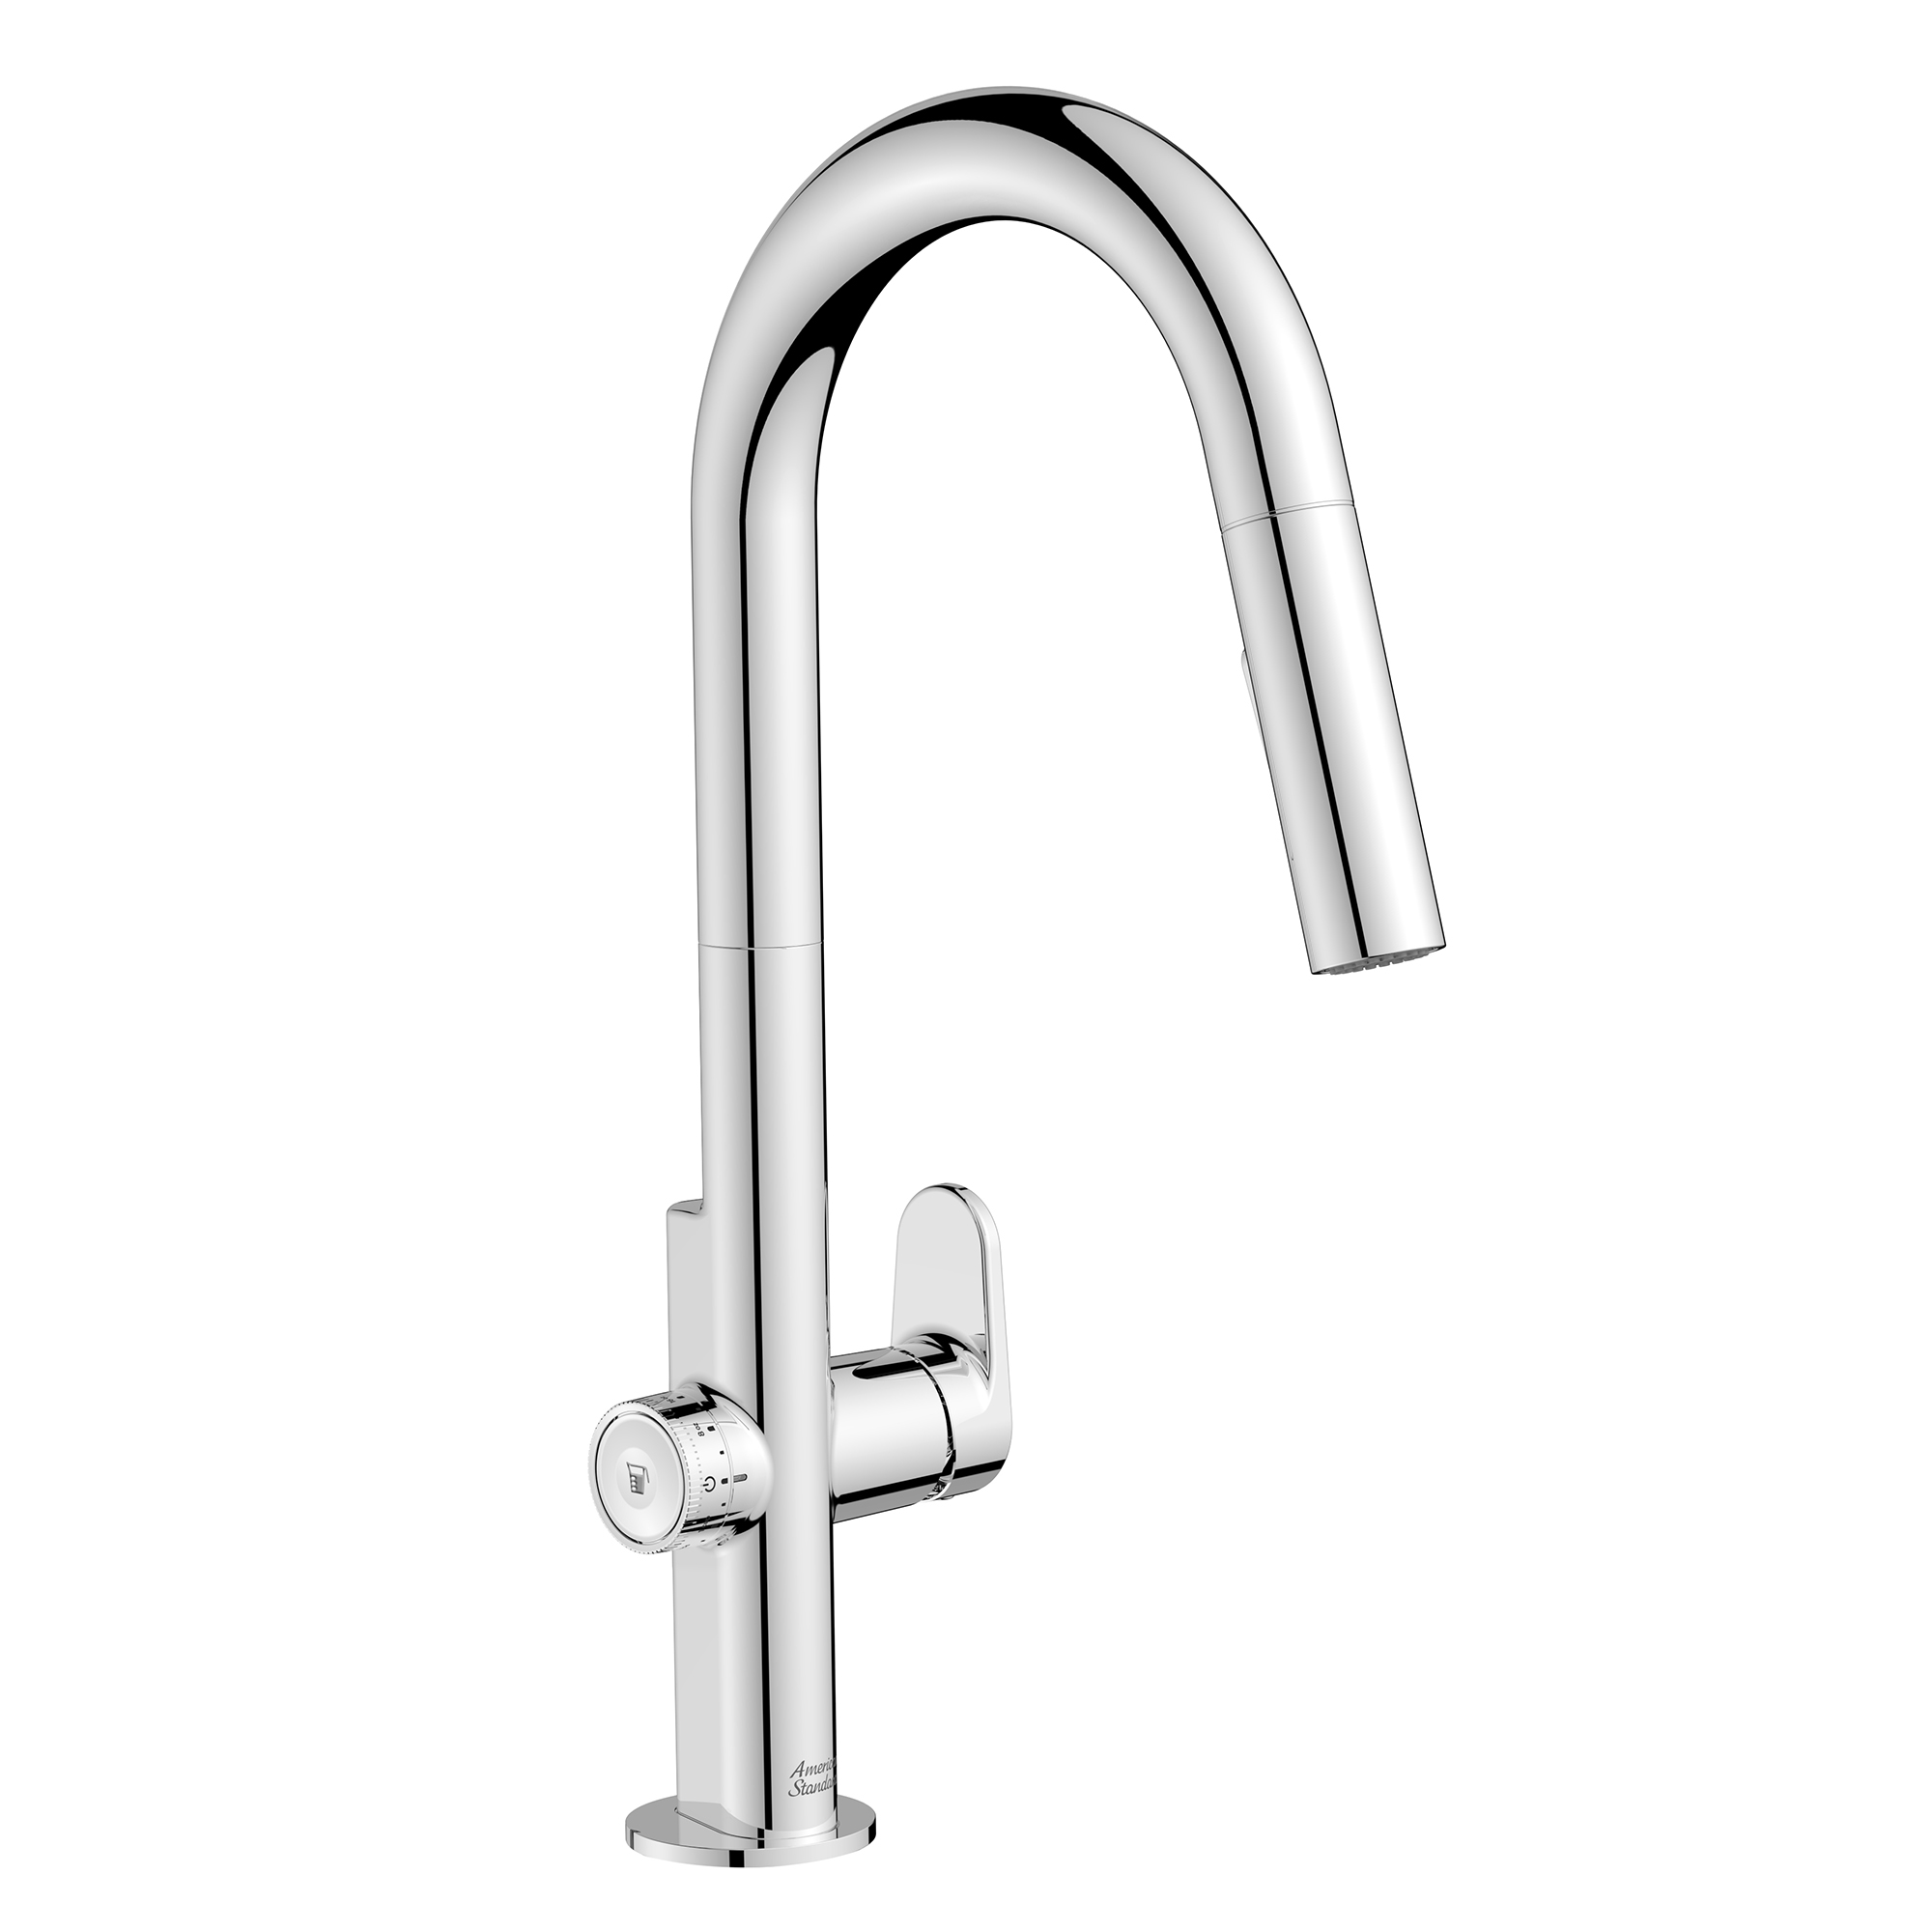 Beale MeasureFill™ 2-Handle Pull-Down Dual Spray Kitchen Faucet 1.5 gpm/5.7 L/min With MeasureFill™ Dial